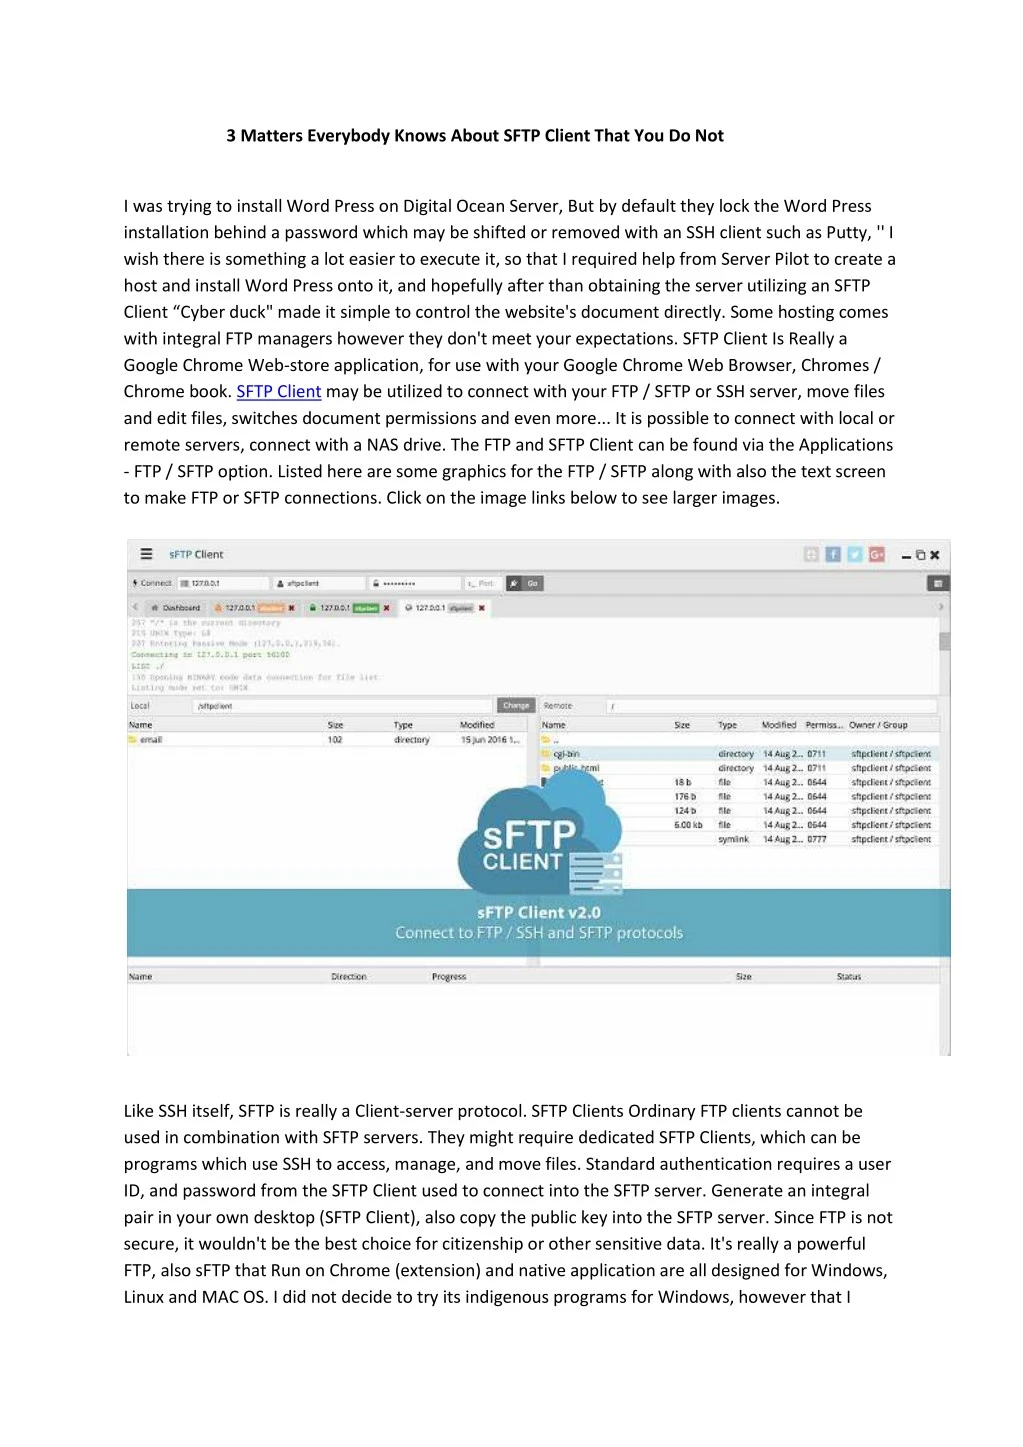 3 matters everybody knows about sftp client that